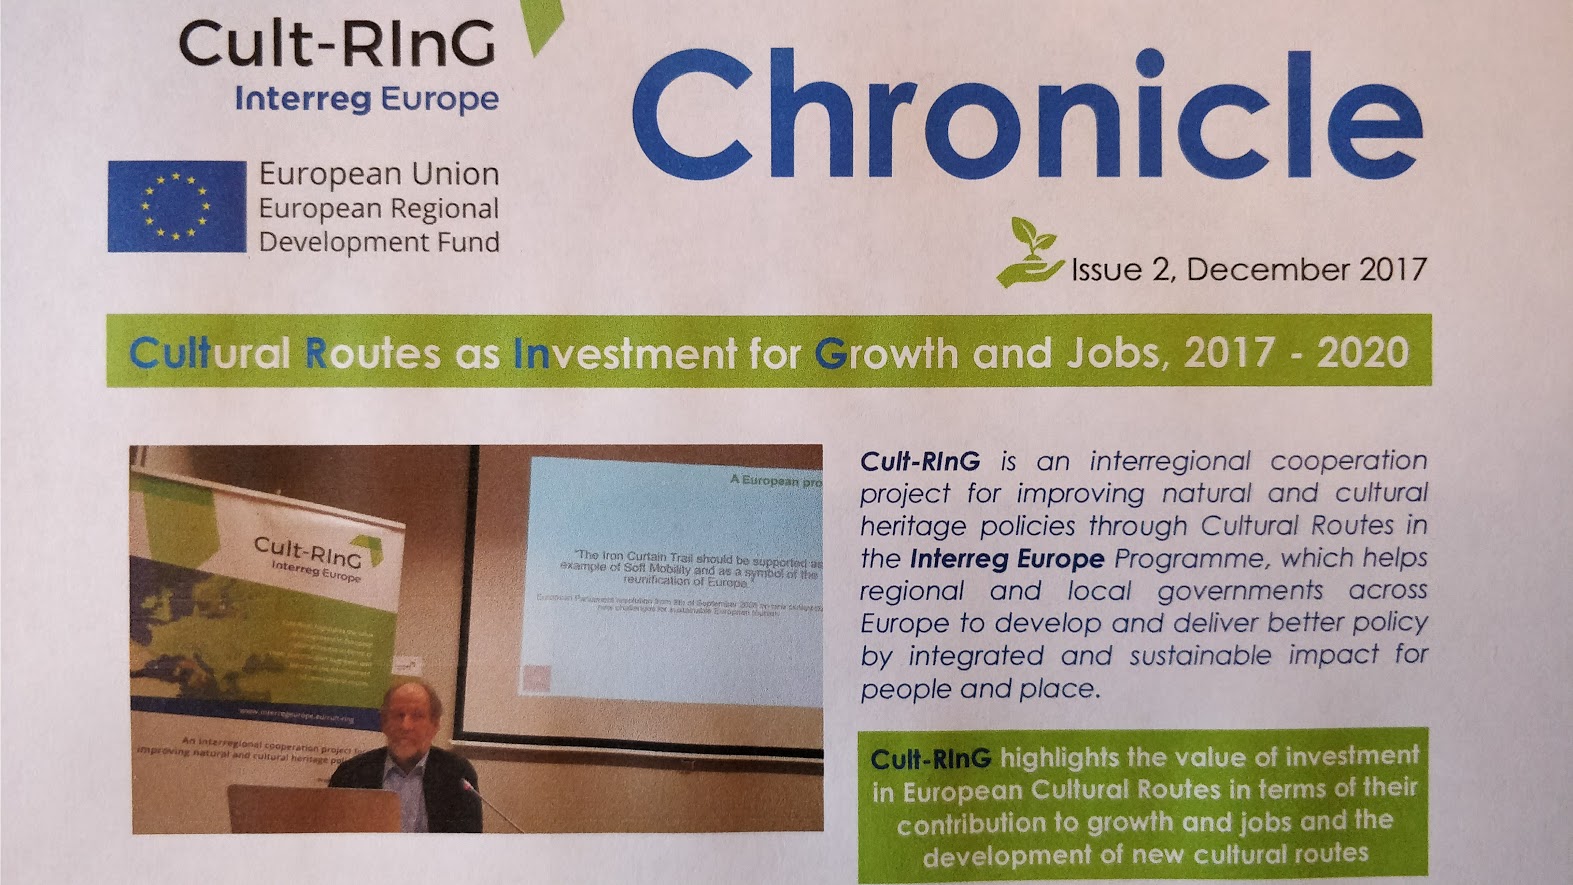 Newsletter No 2 Cult-RInG Chronicle published